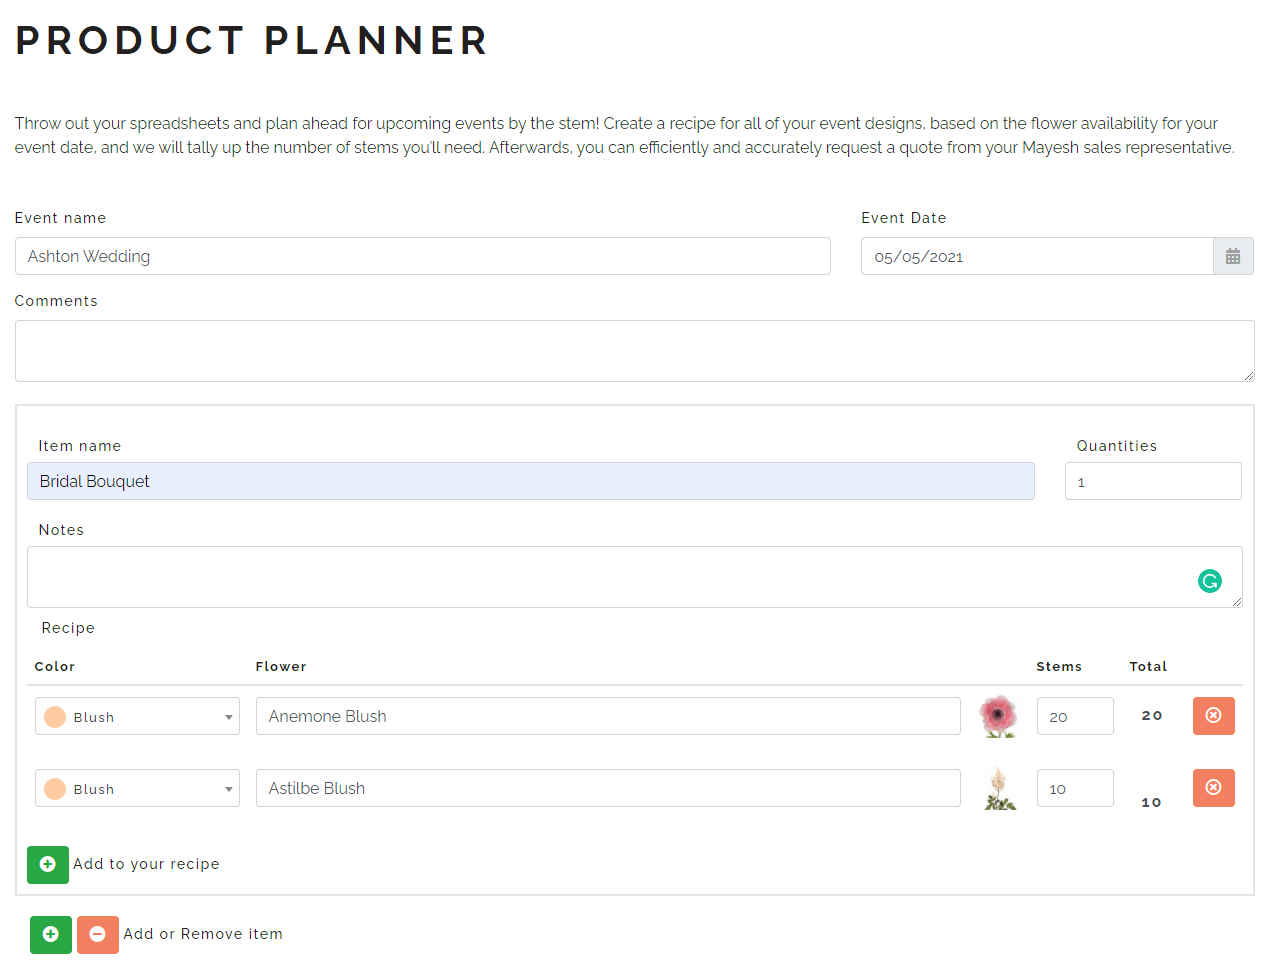 Mayesh Product Planner